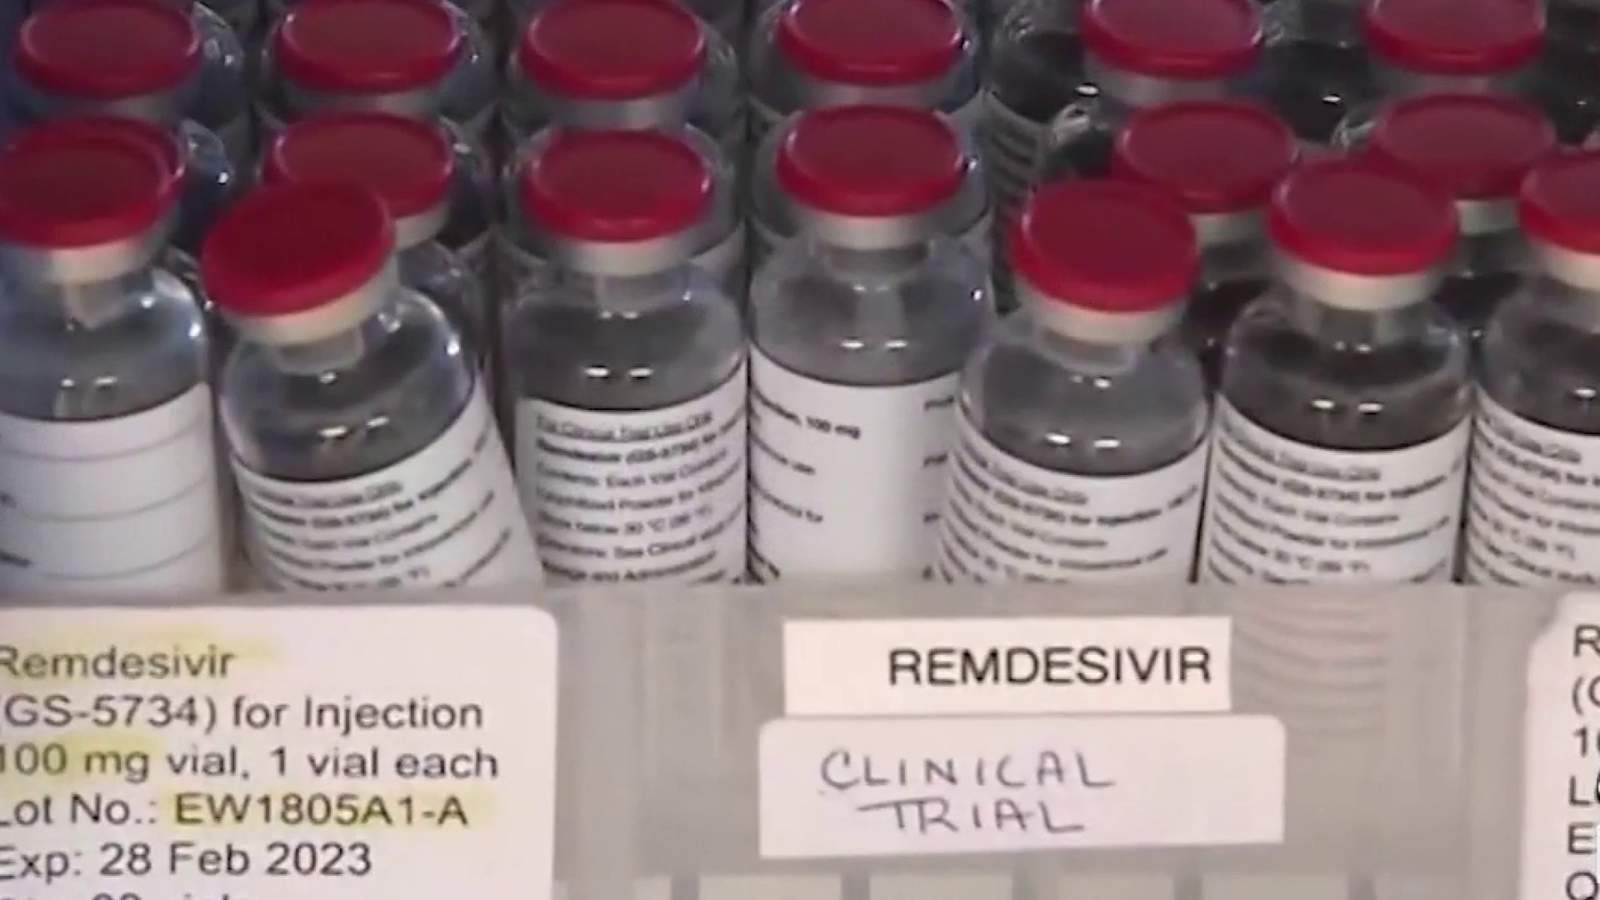 Local hospitals using remdesivir for treatment of COVID-19